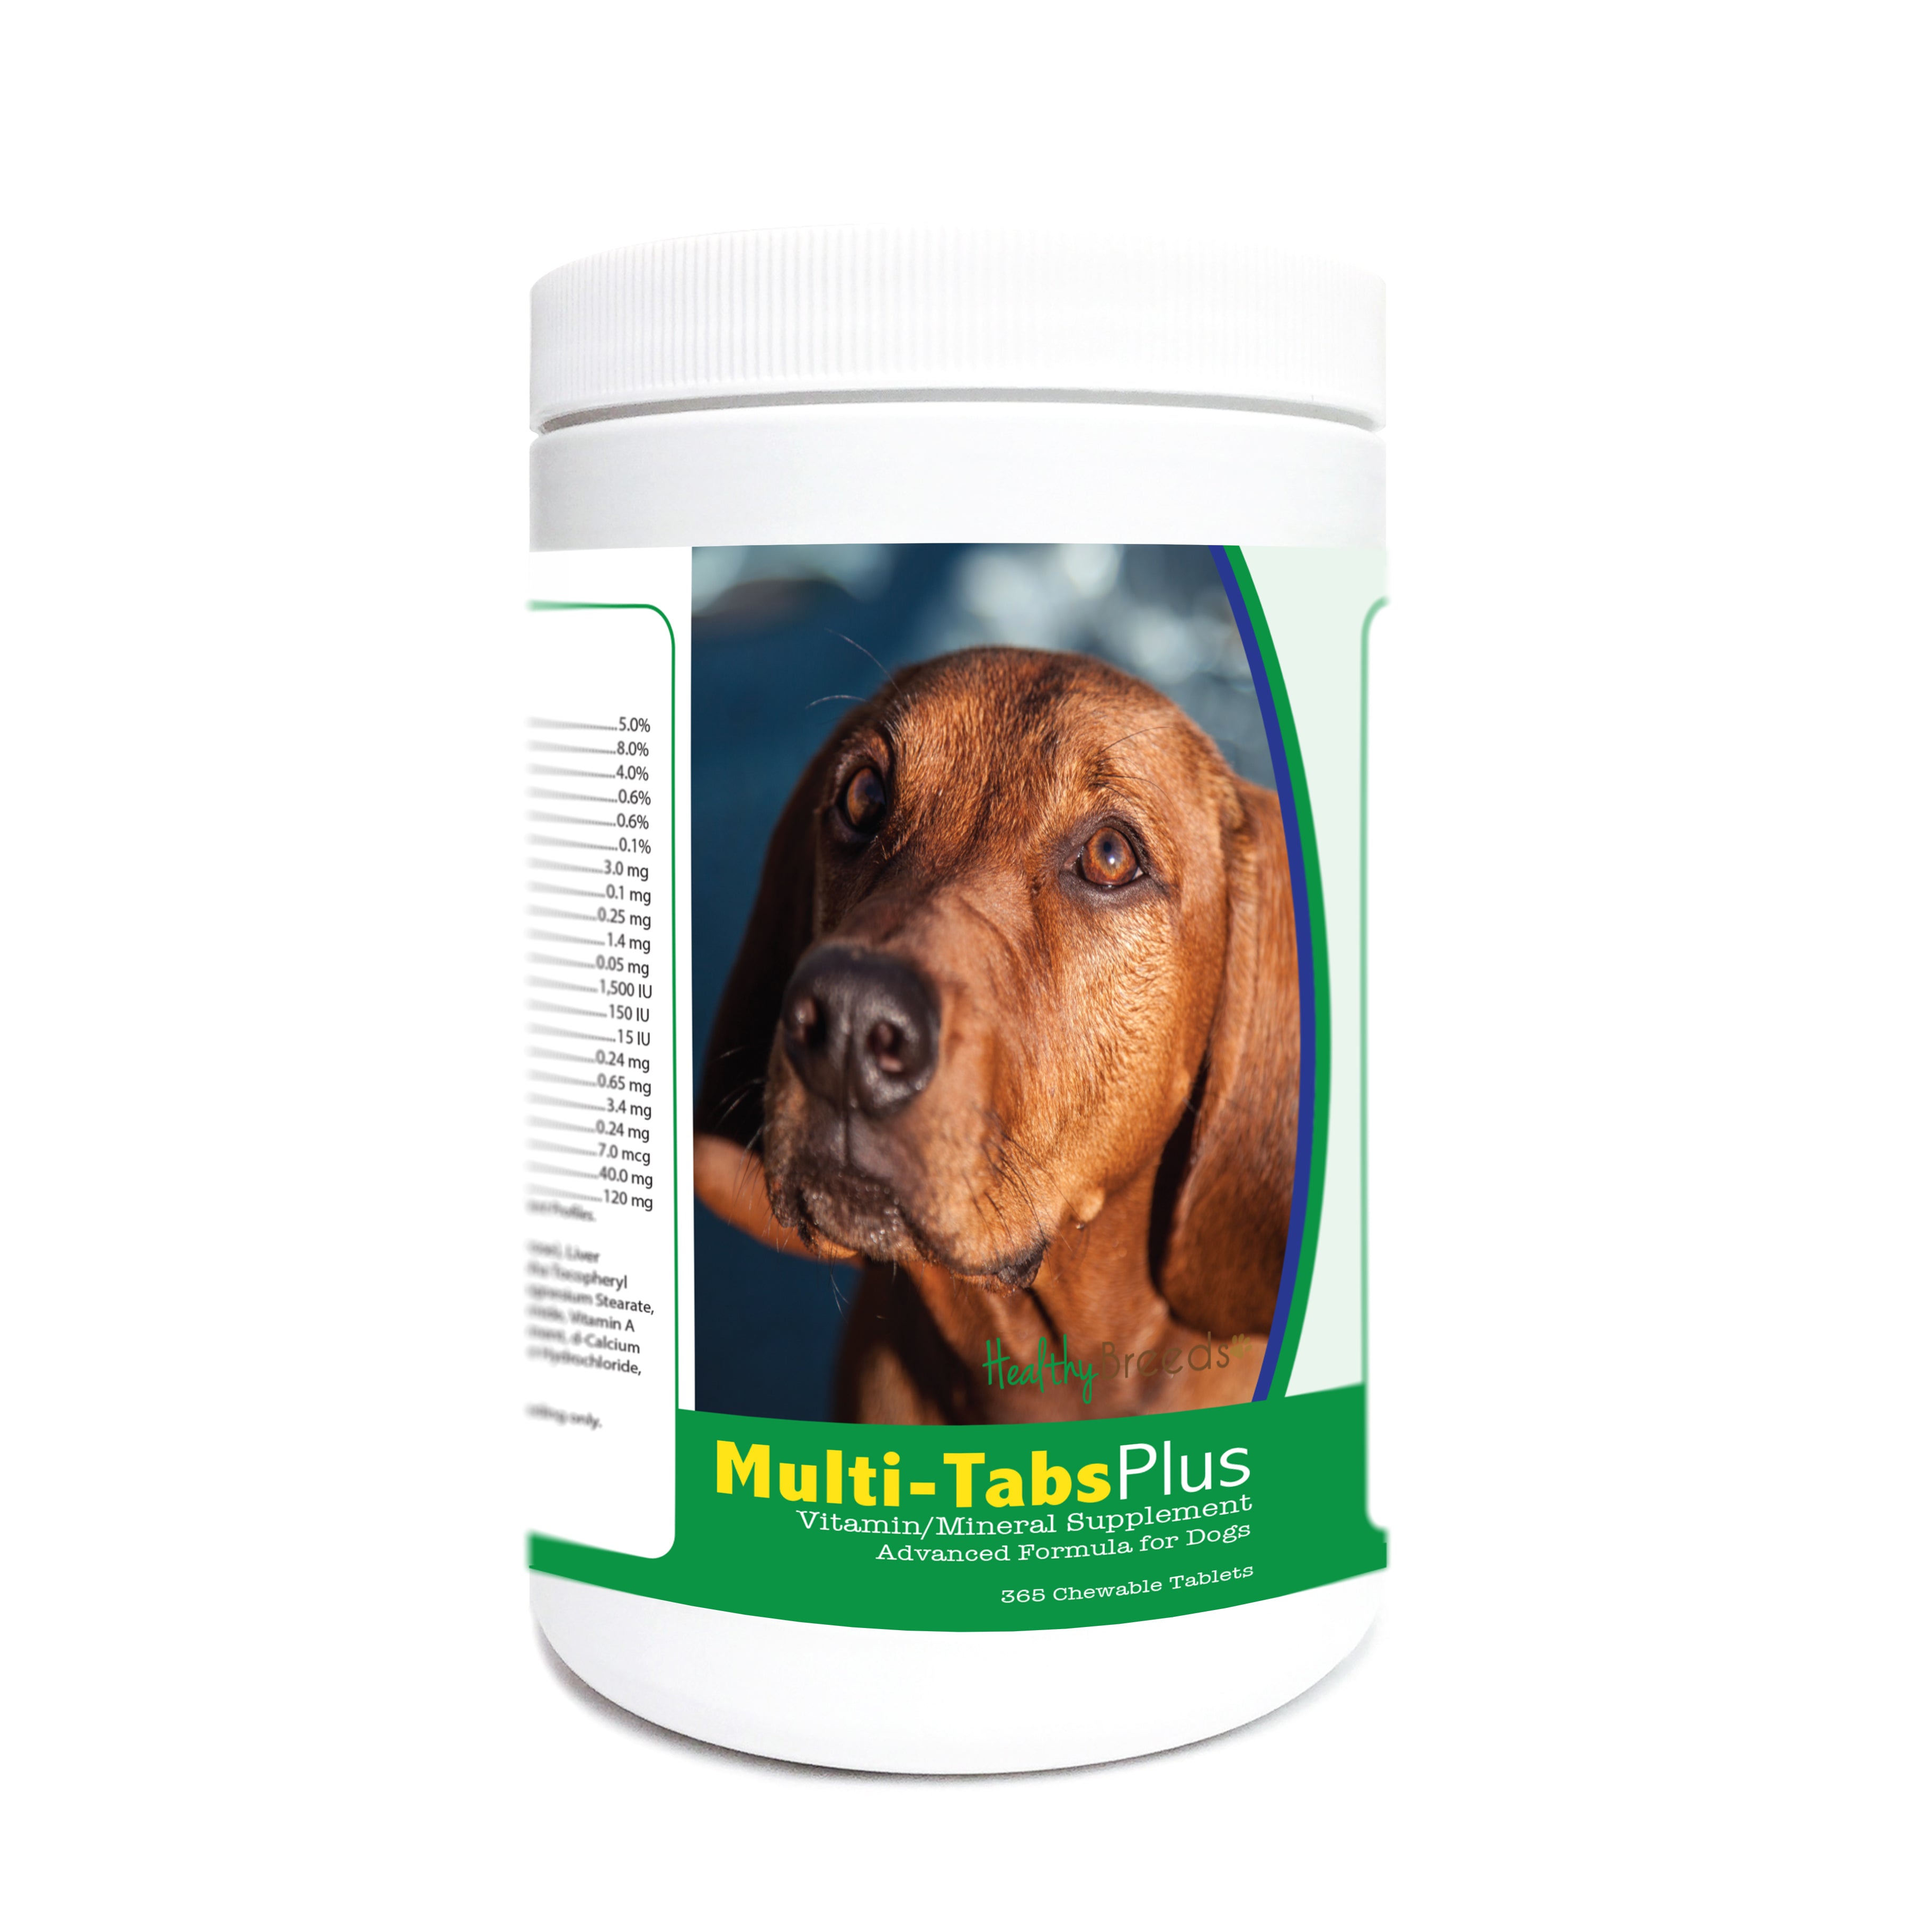 Redbone Coonhound Multi-Tabs Plus Chewable Tablets 365 Count